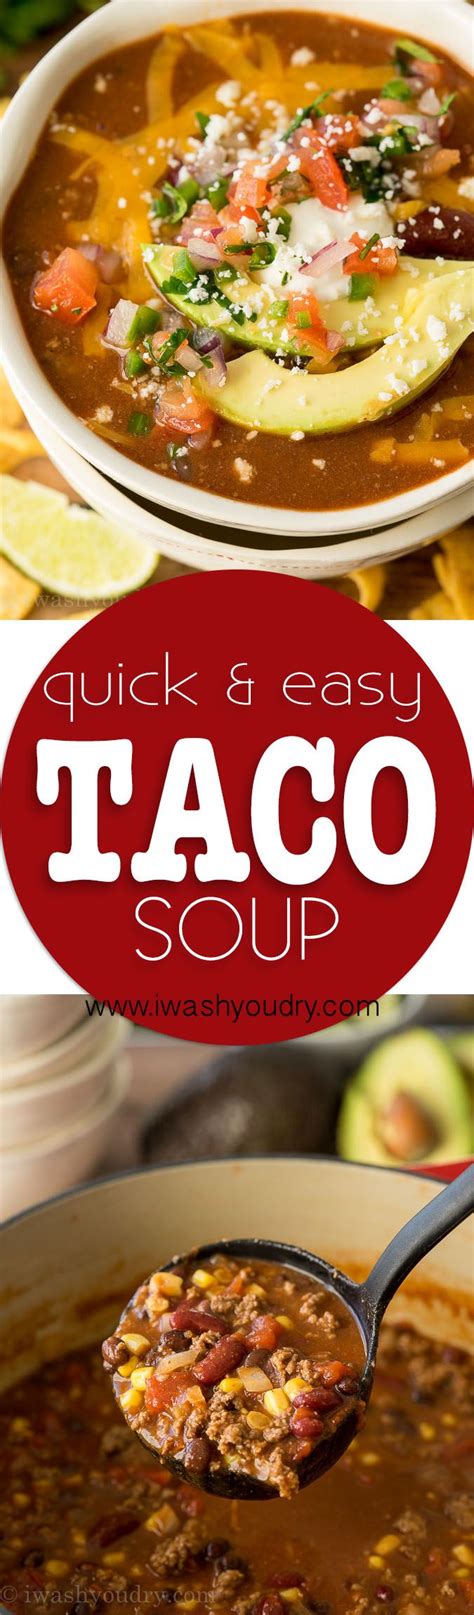 Quick And Easy Taco Soup Recipe Recipe Quick And Easy Taco Soup